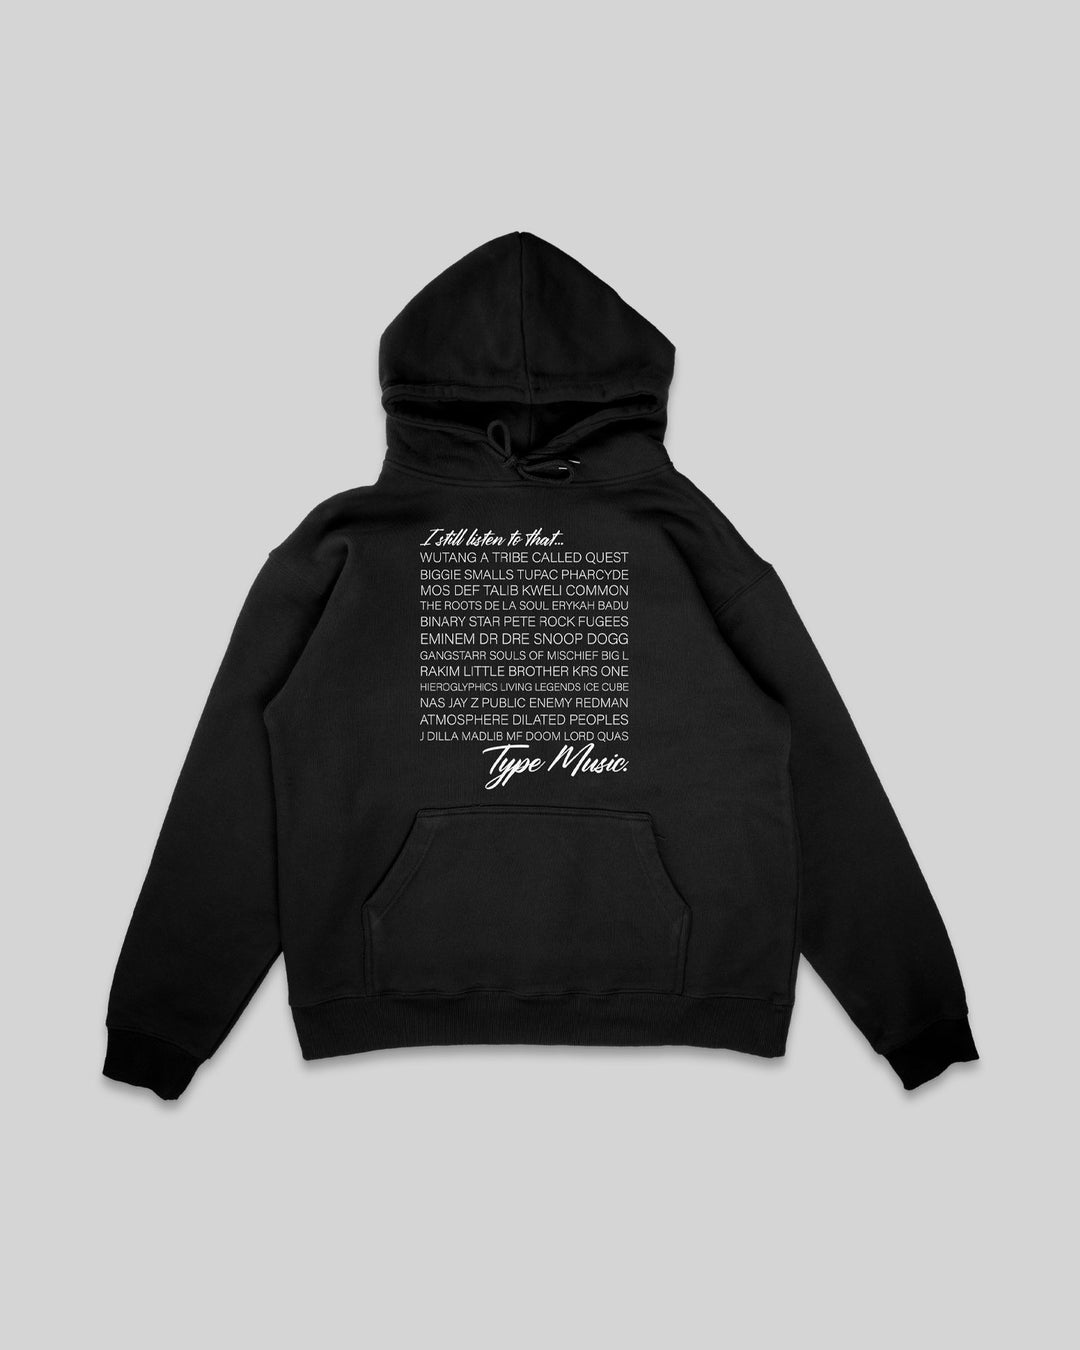 I Still Listen To That.. 2022 Edition Black Hoodie - trainofthoughtcollective